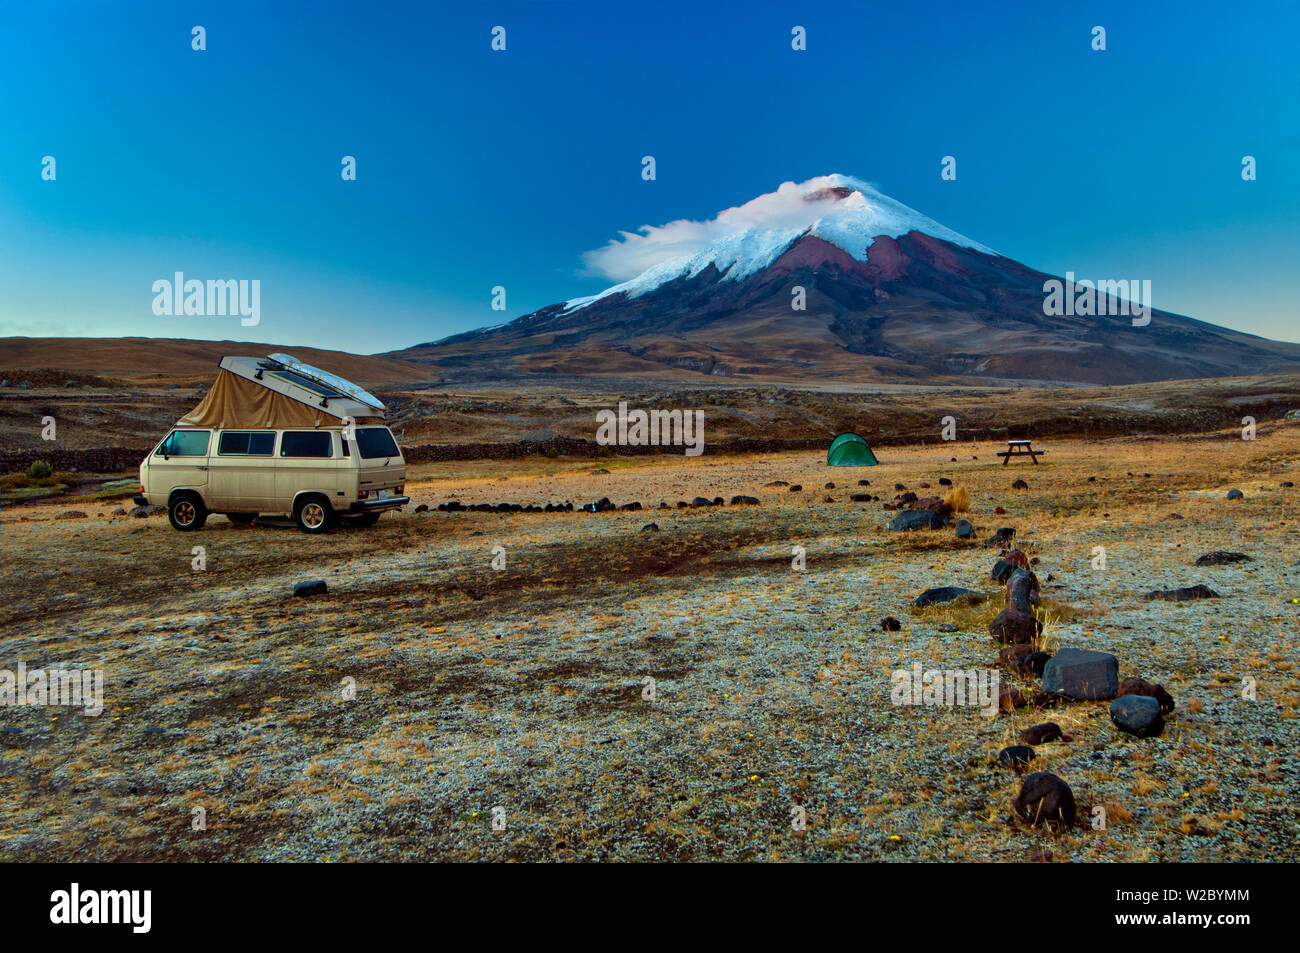 Cotopaxi National Park, Snow-Capped Cotopaxi Volcano, One of The Highest Active Volcanoes, Volkswagon Bus, Campground, Altitude of 12,000 Feet, Cotopaxi Province, Ecuador Stock Photo